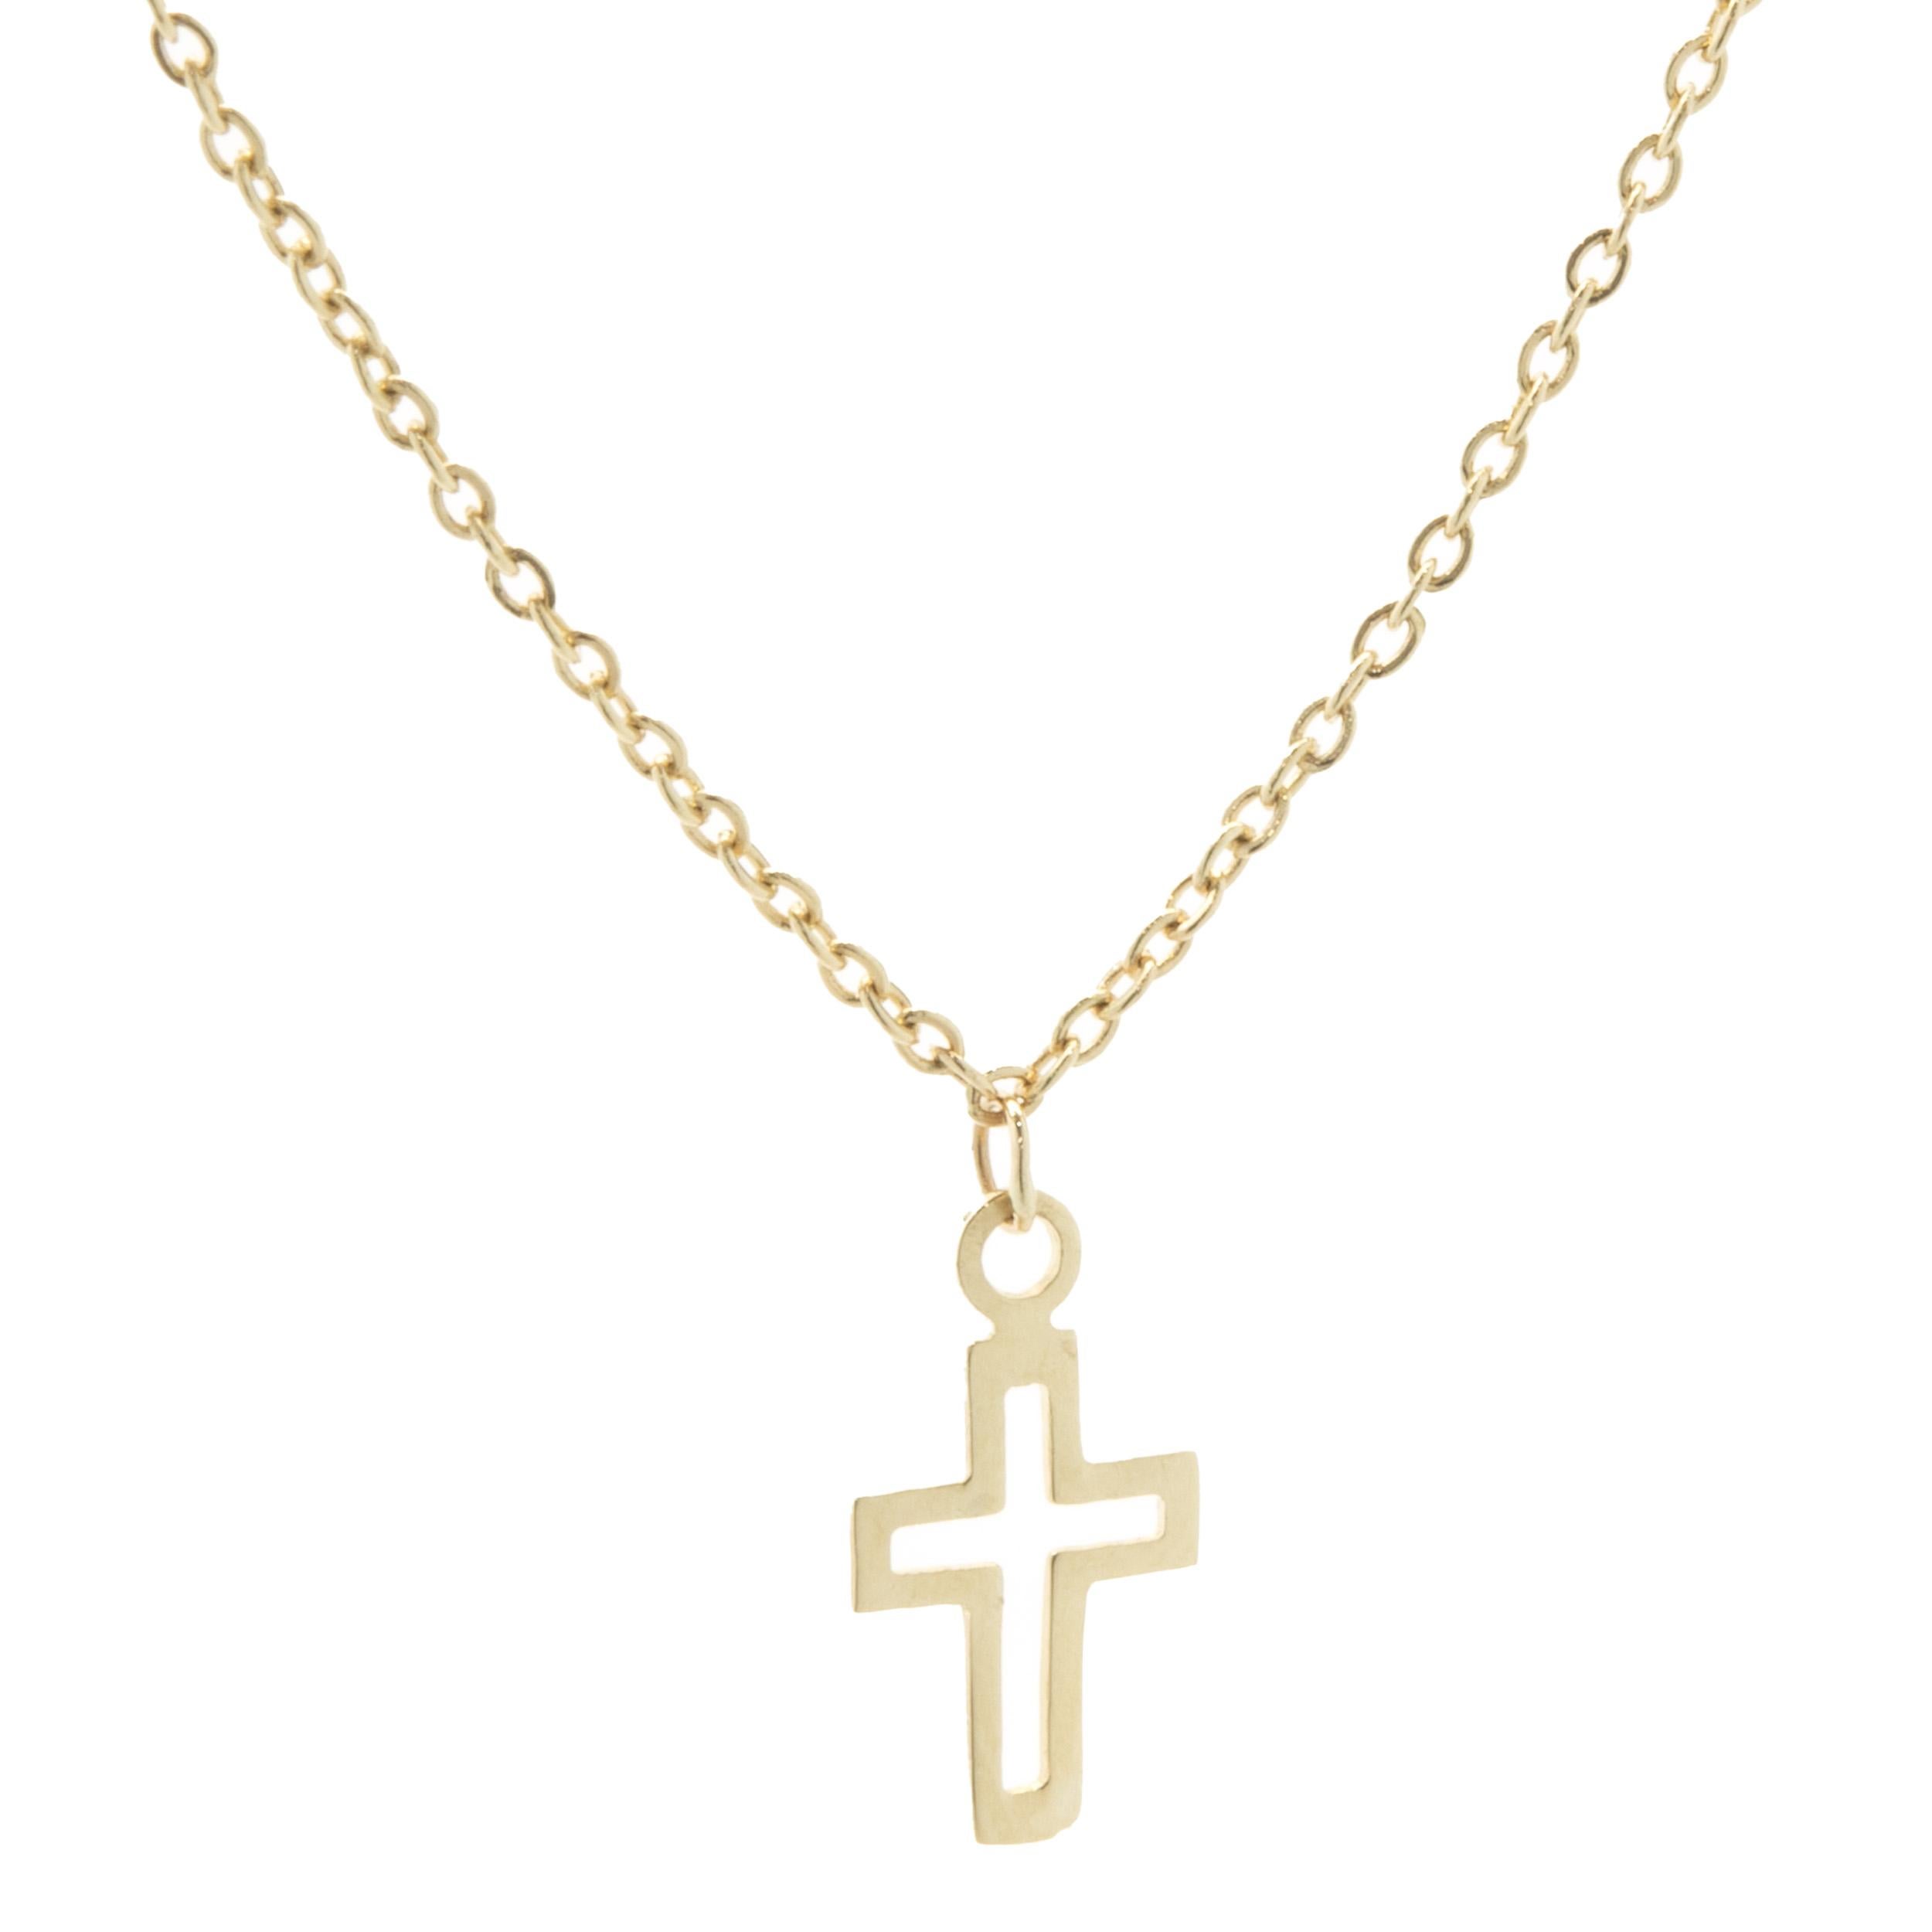 Designer: custom
Material: 14K yellow gold
Dimensions: necklace measures 18-inches in length
Weight: 2.38 grams